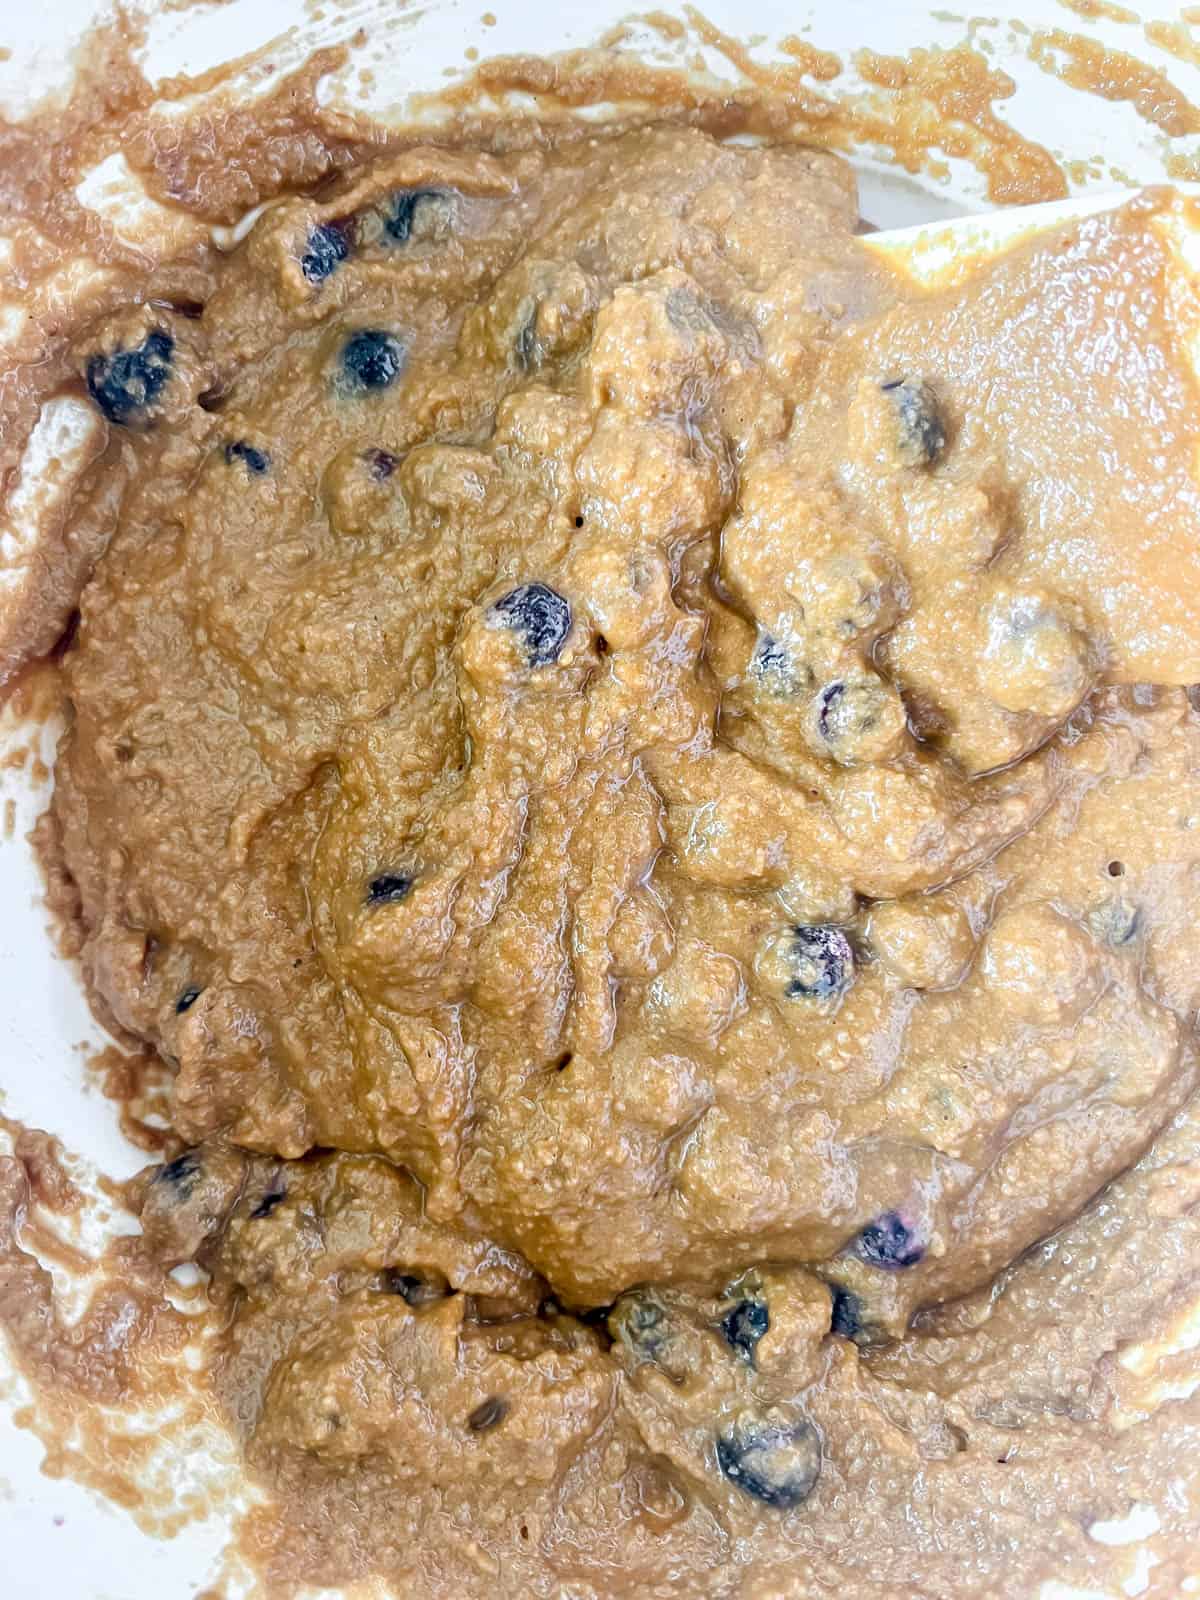 The blueberries folded into the paleo muffin batter.